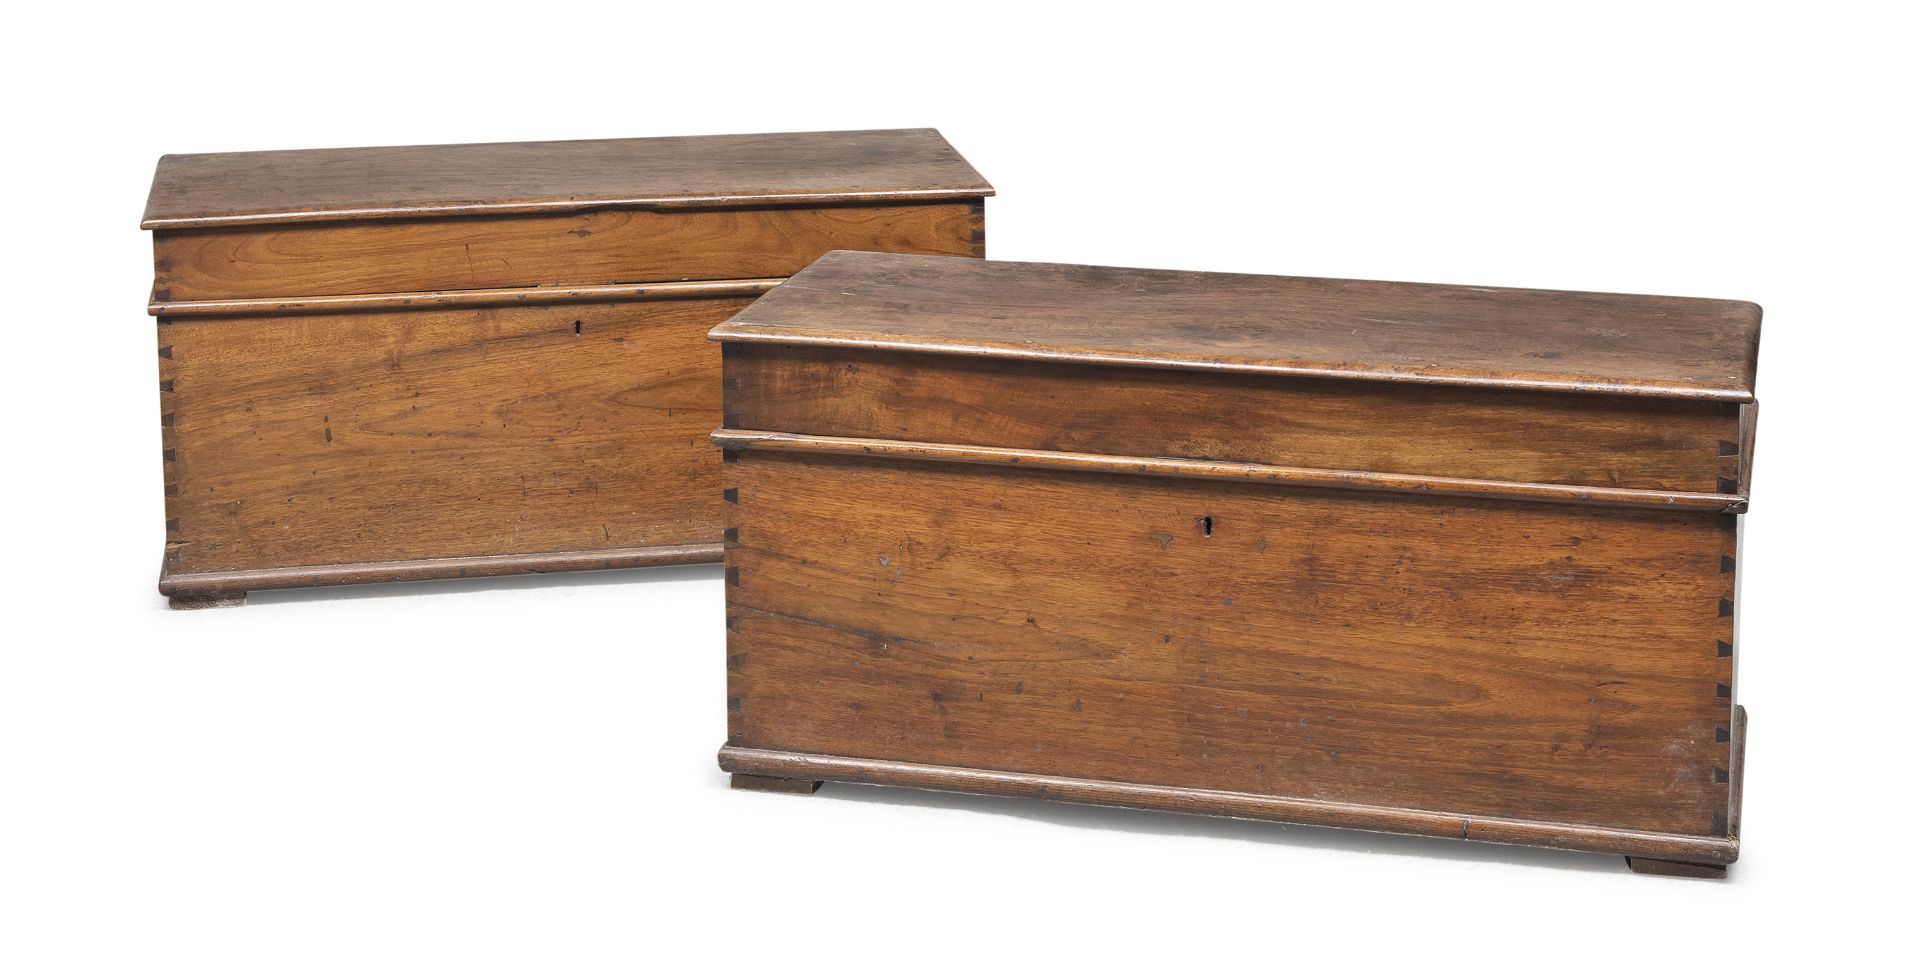 PAIR OF SMALL WALNUT CHESTS LATE 18th CENTURY